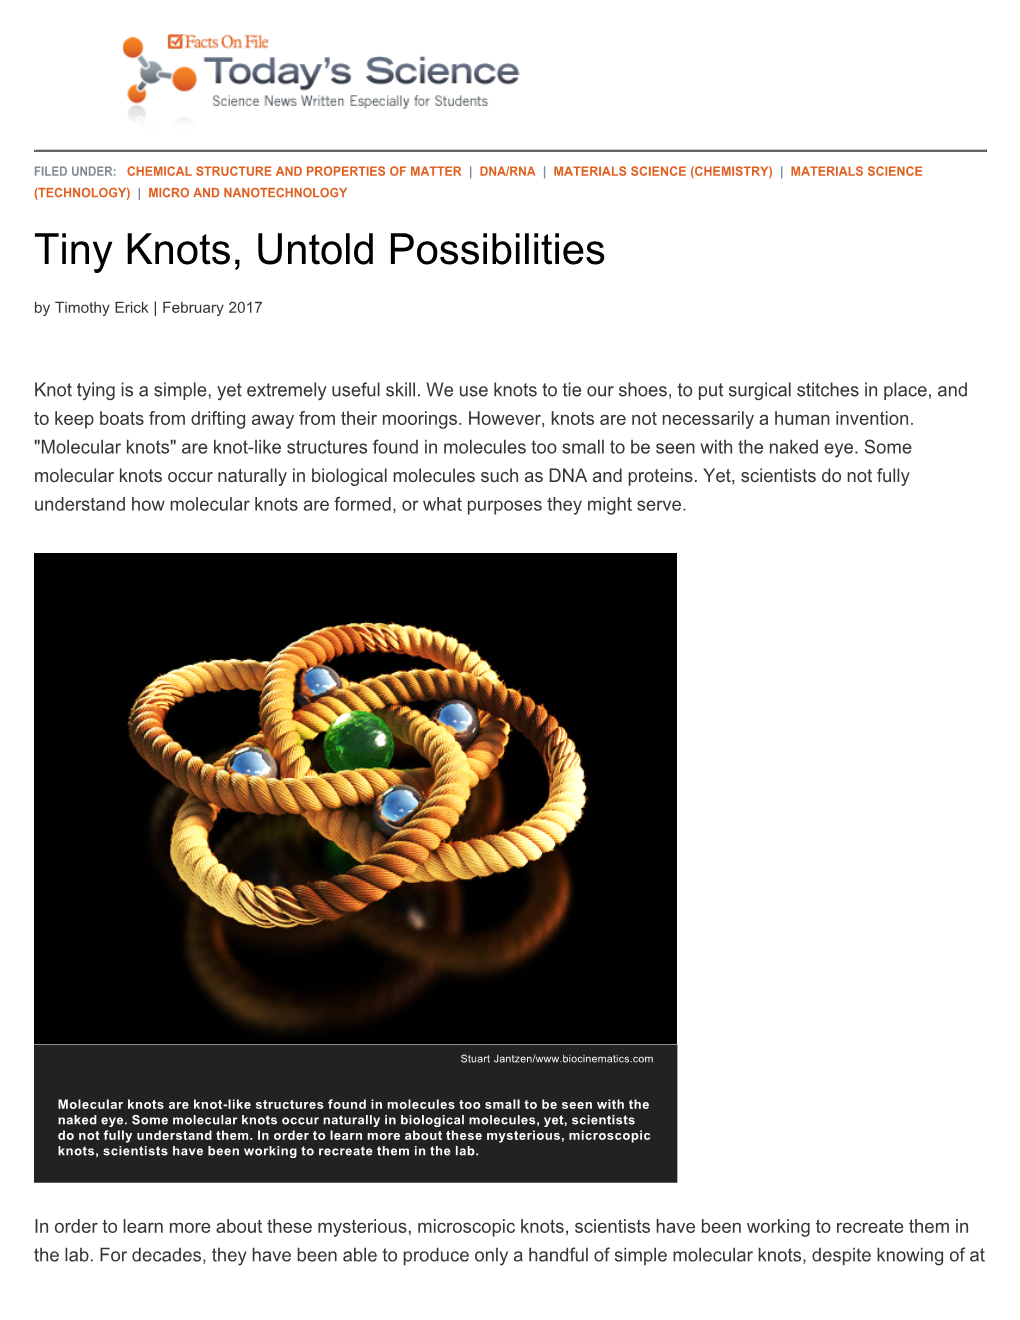 Tiny Knots, Untold Possibilities by Timothy Erick | February 2017